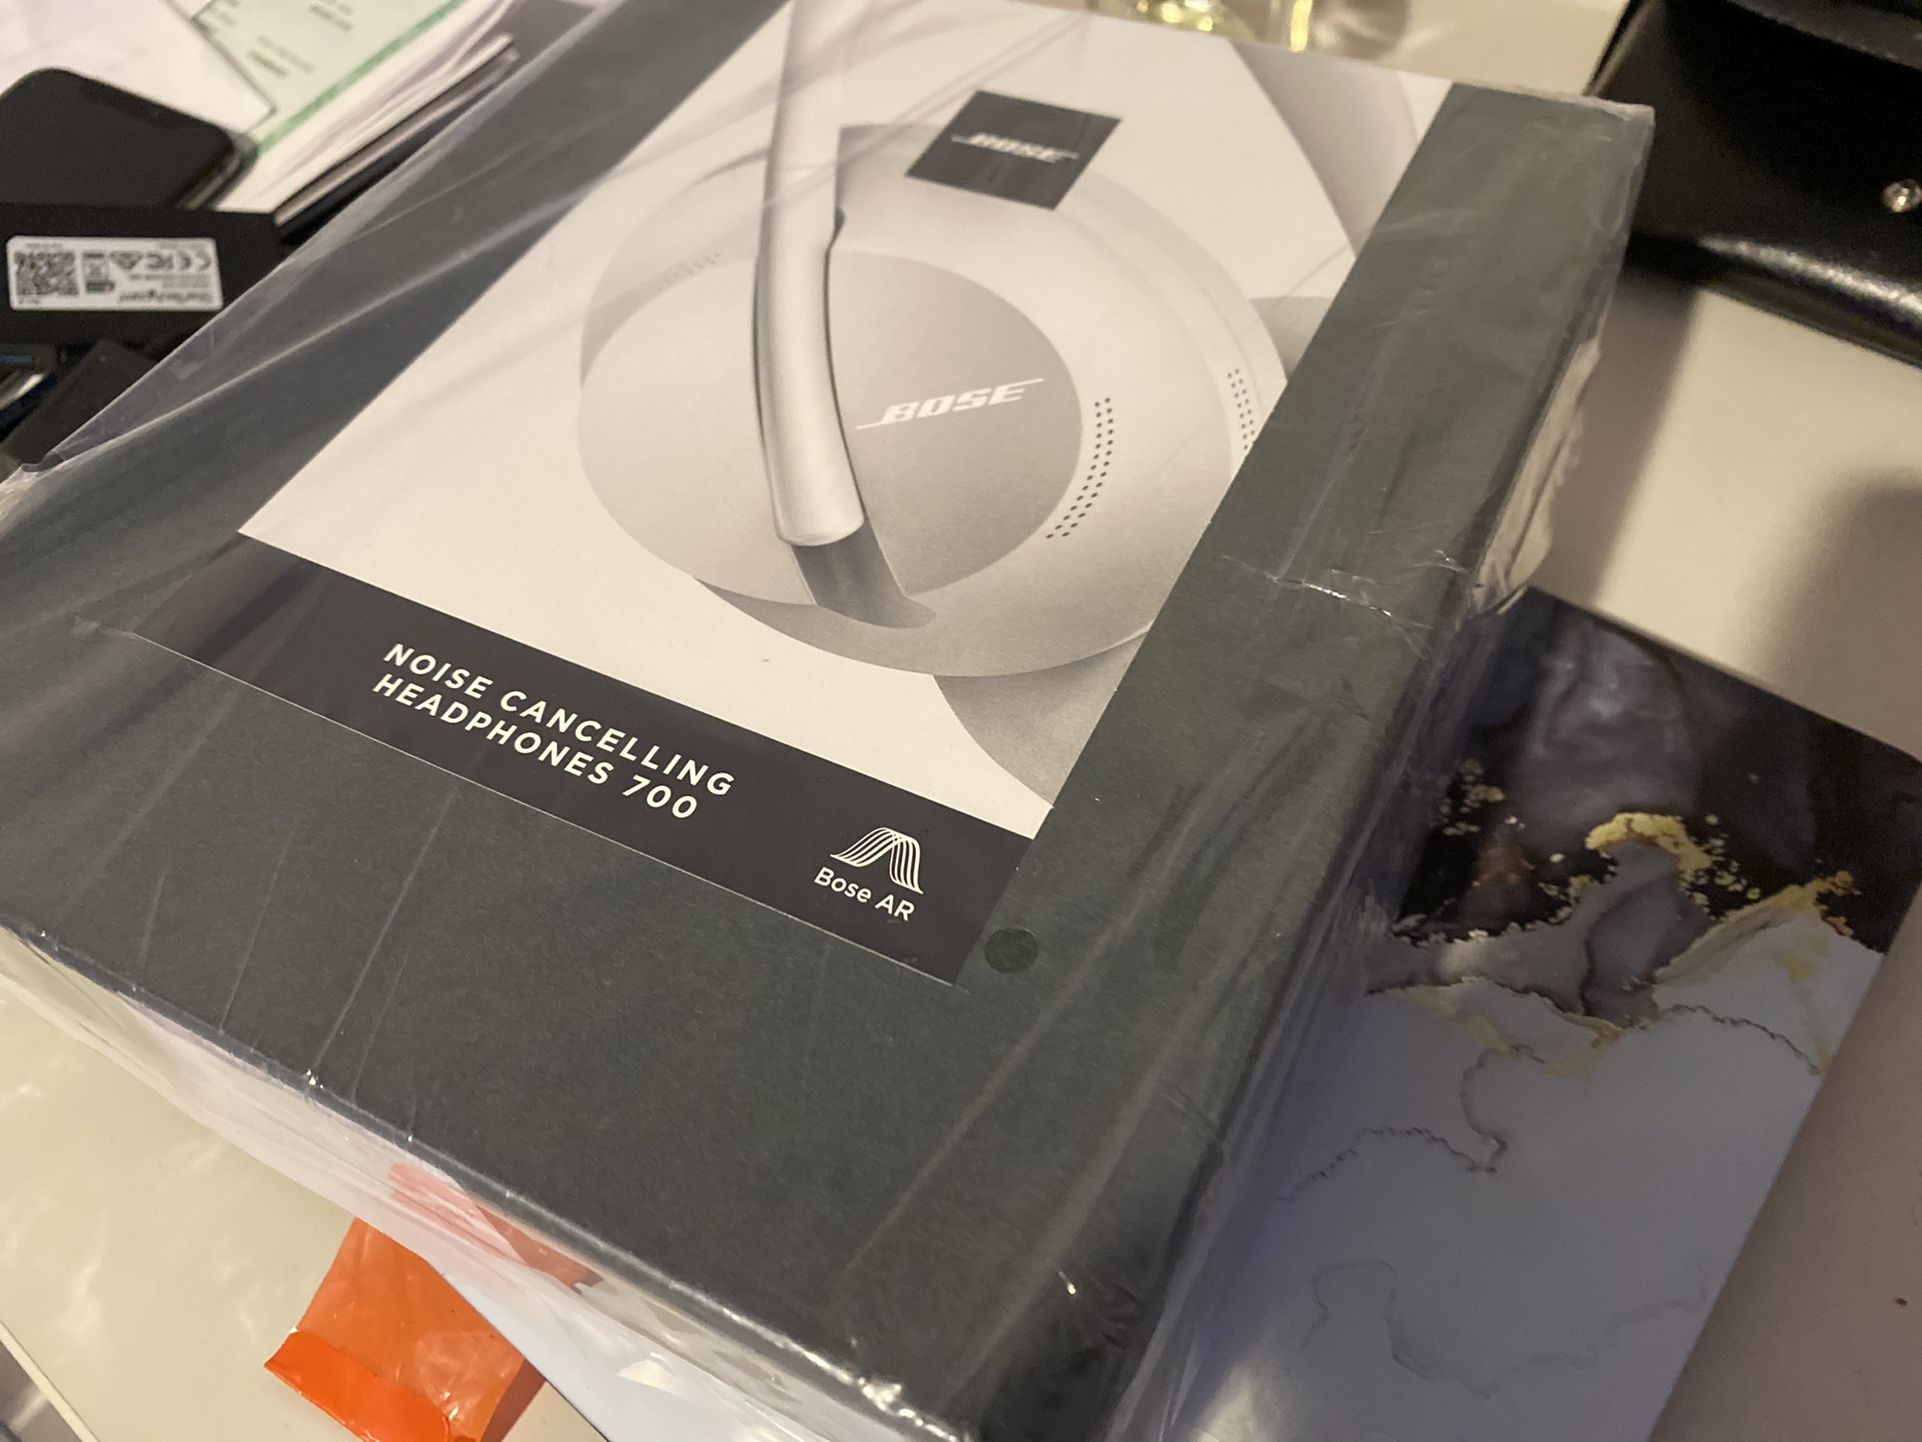 Bose Noise Cancelling Headphones 700 - Luxe Silver